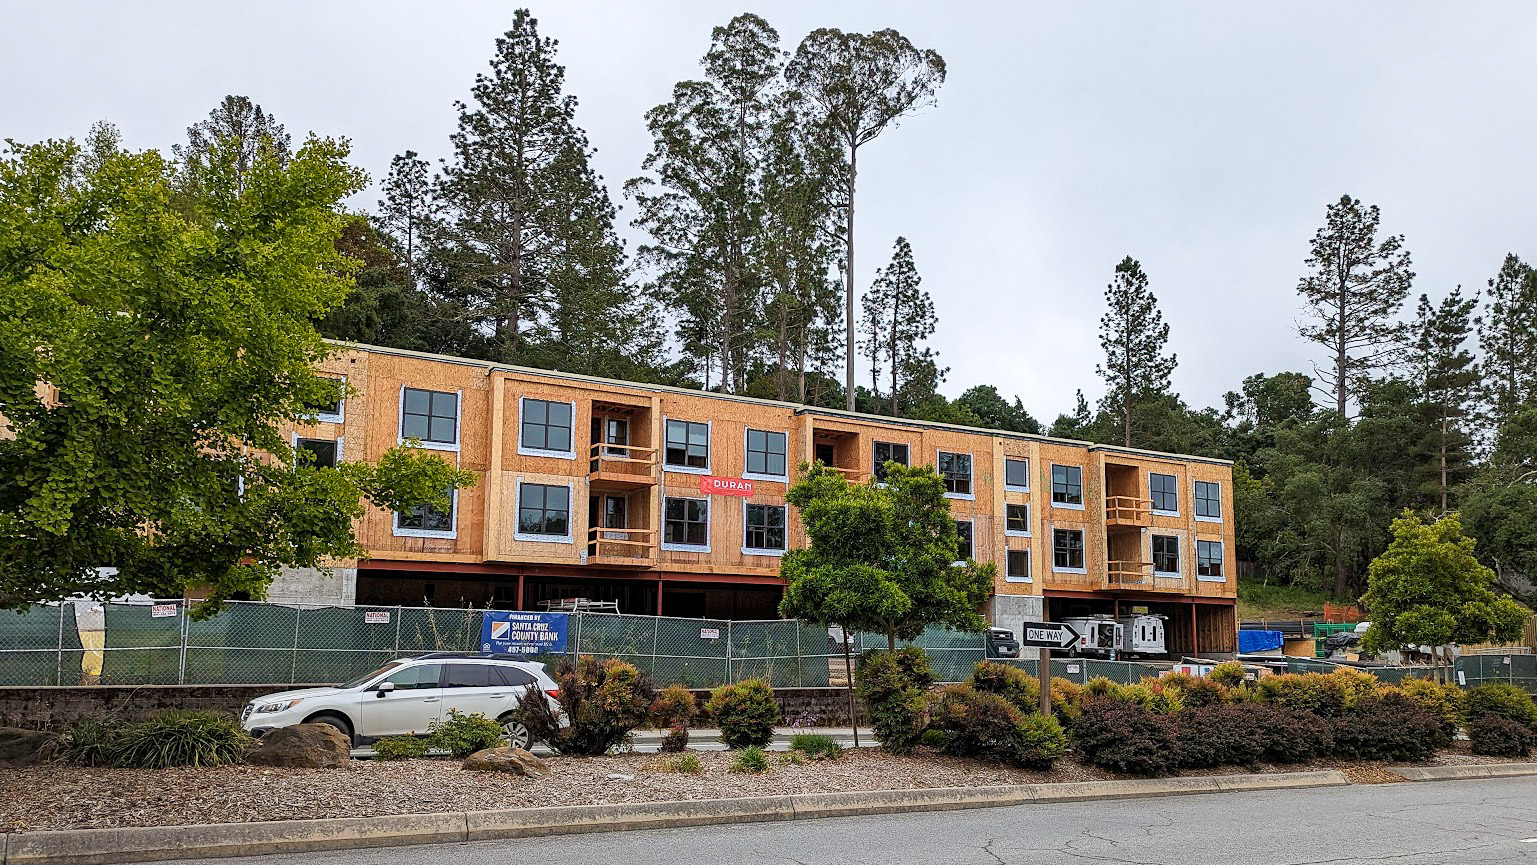 Construction continues on a 16-unit condominium project at 4104 Scotts Valley Drive in June. (Stephen Baxter — Santa Cruz Local)